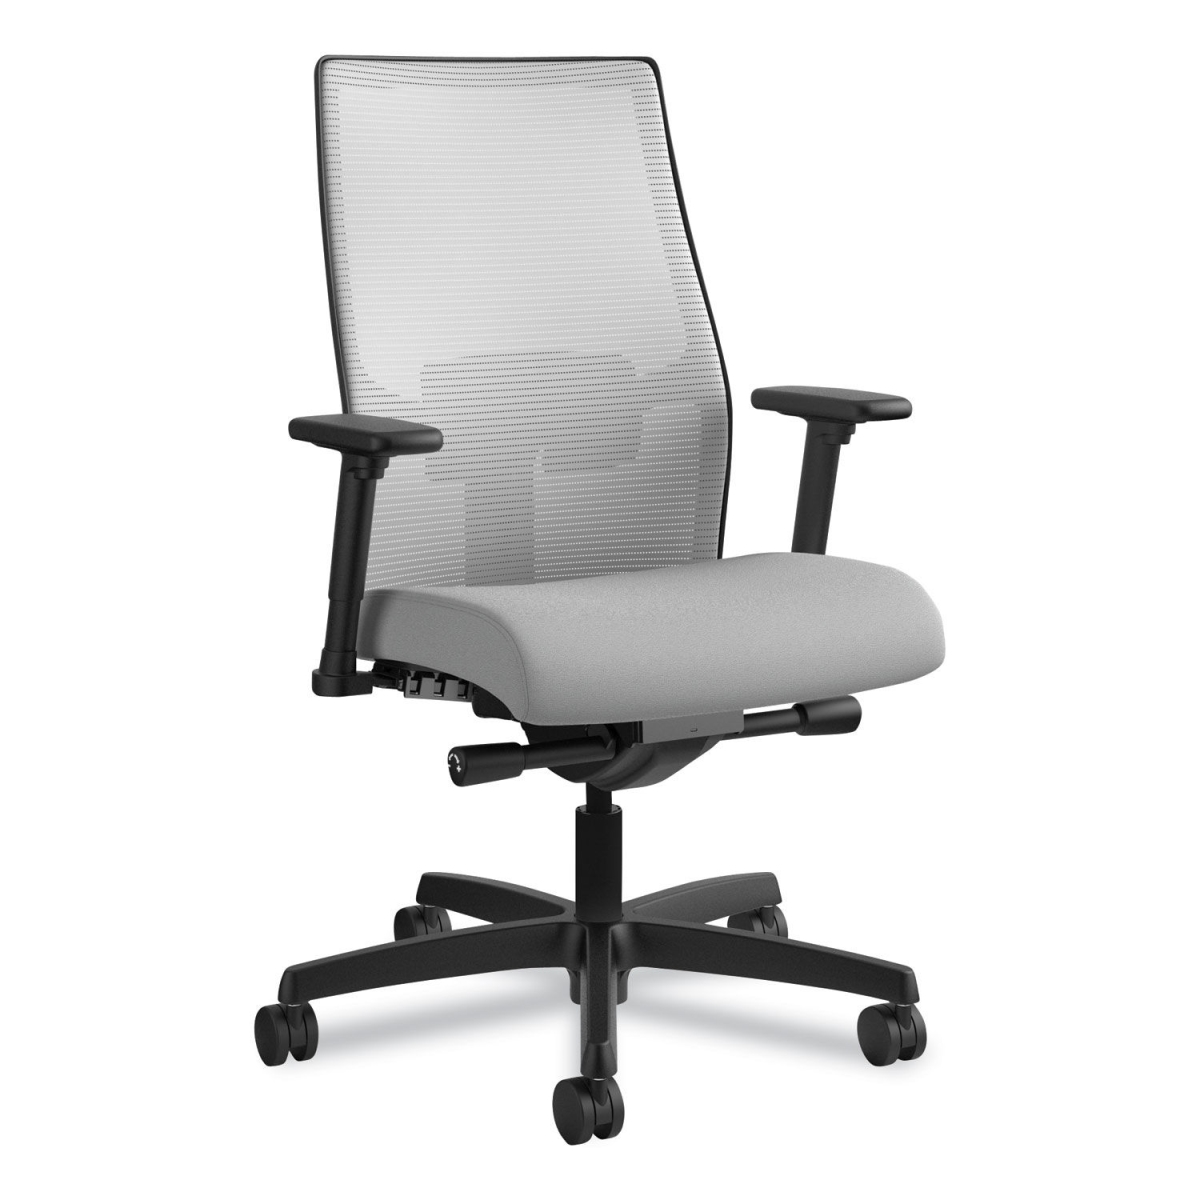 UPC 888531005875 product image for I2M2AFC22ATK 2.0 Ignition 4-Way Stretch Mid-Back Mesh Task Chair, Light Gray | upcitemdb.com